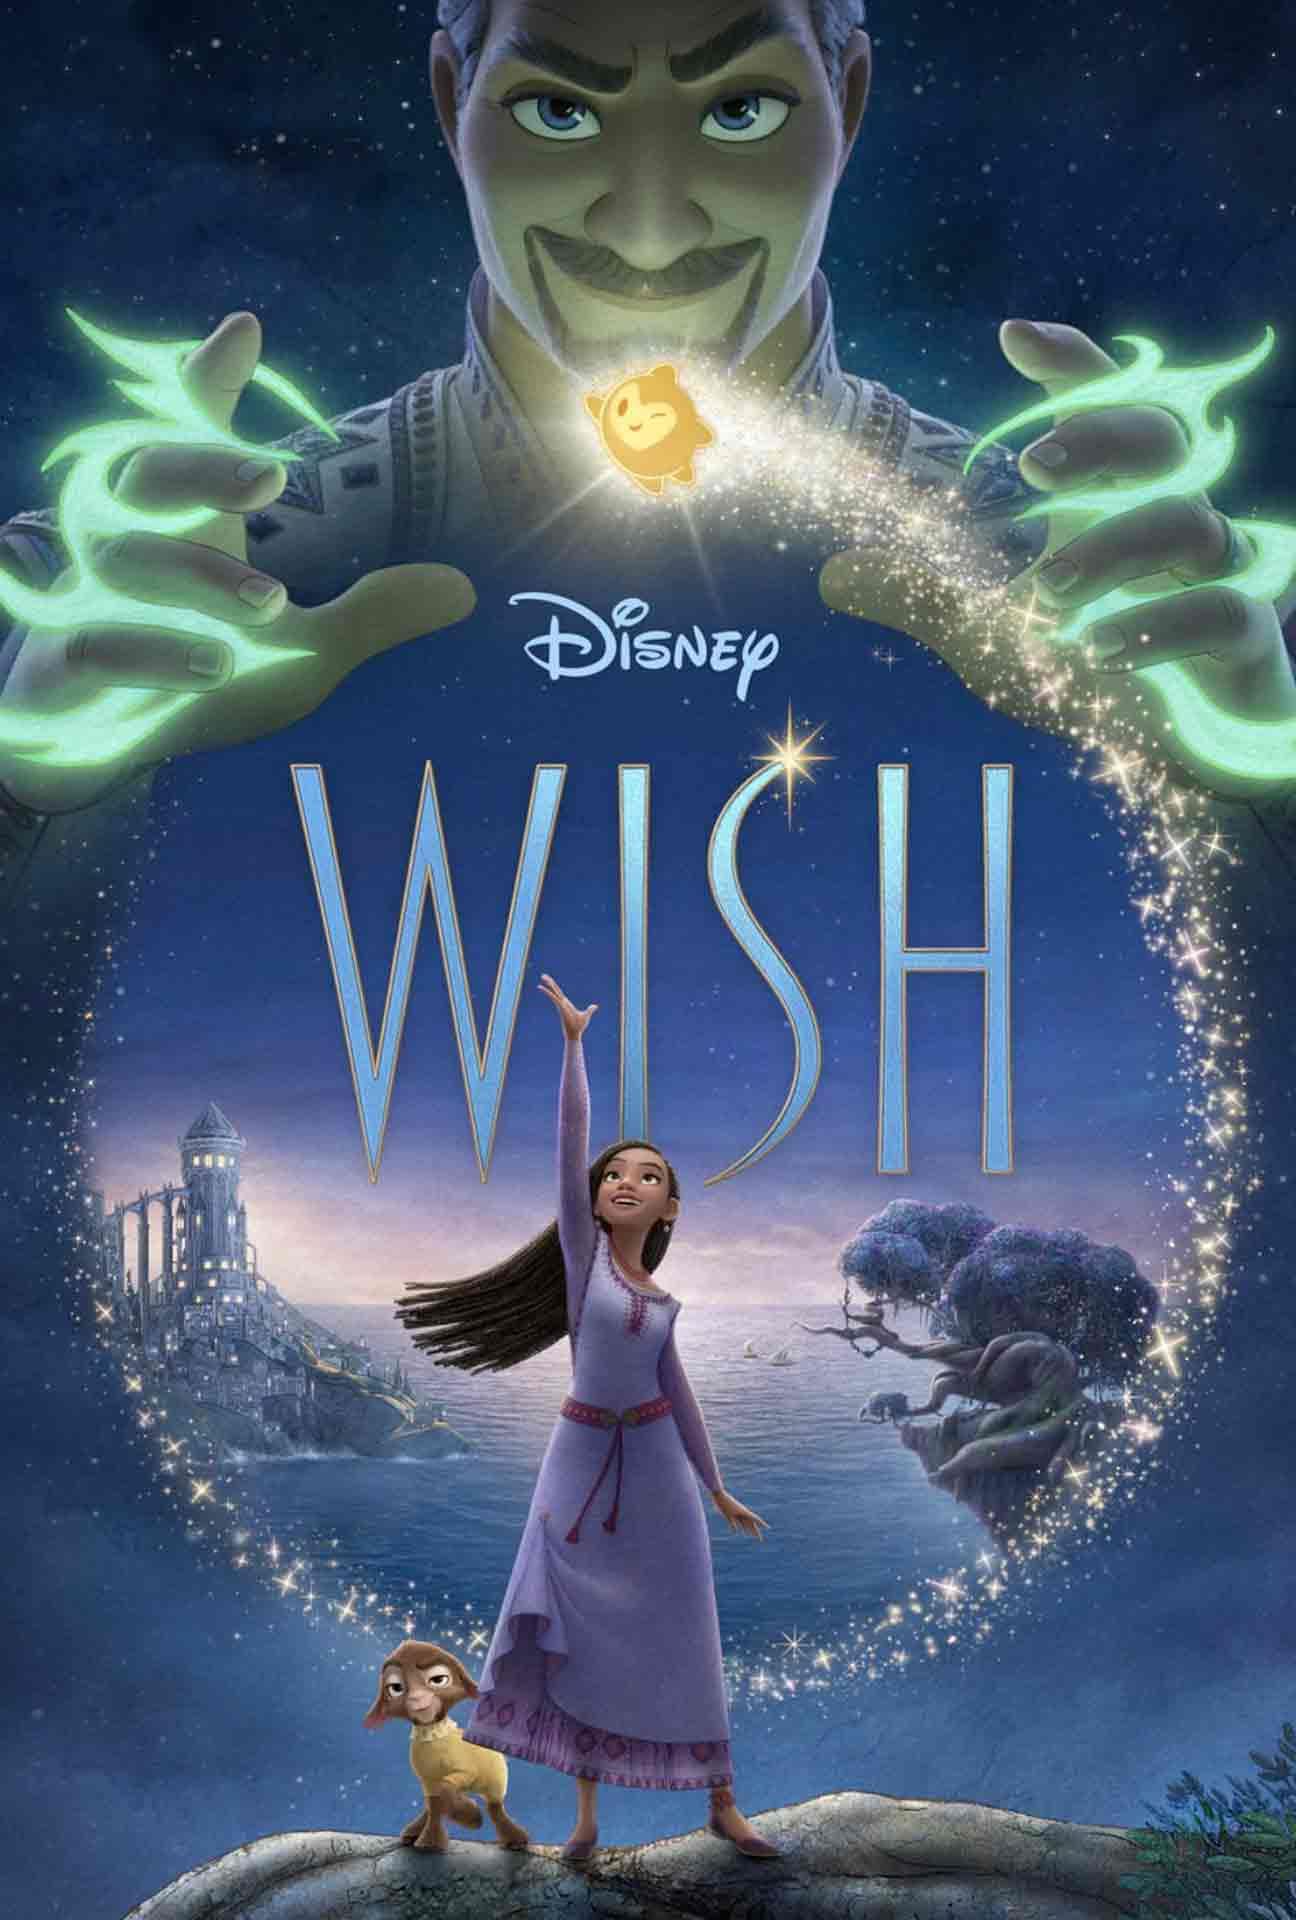 Movie Poster for Wish